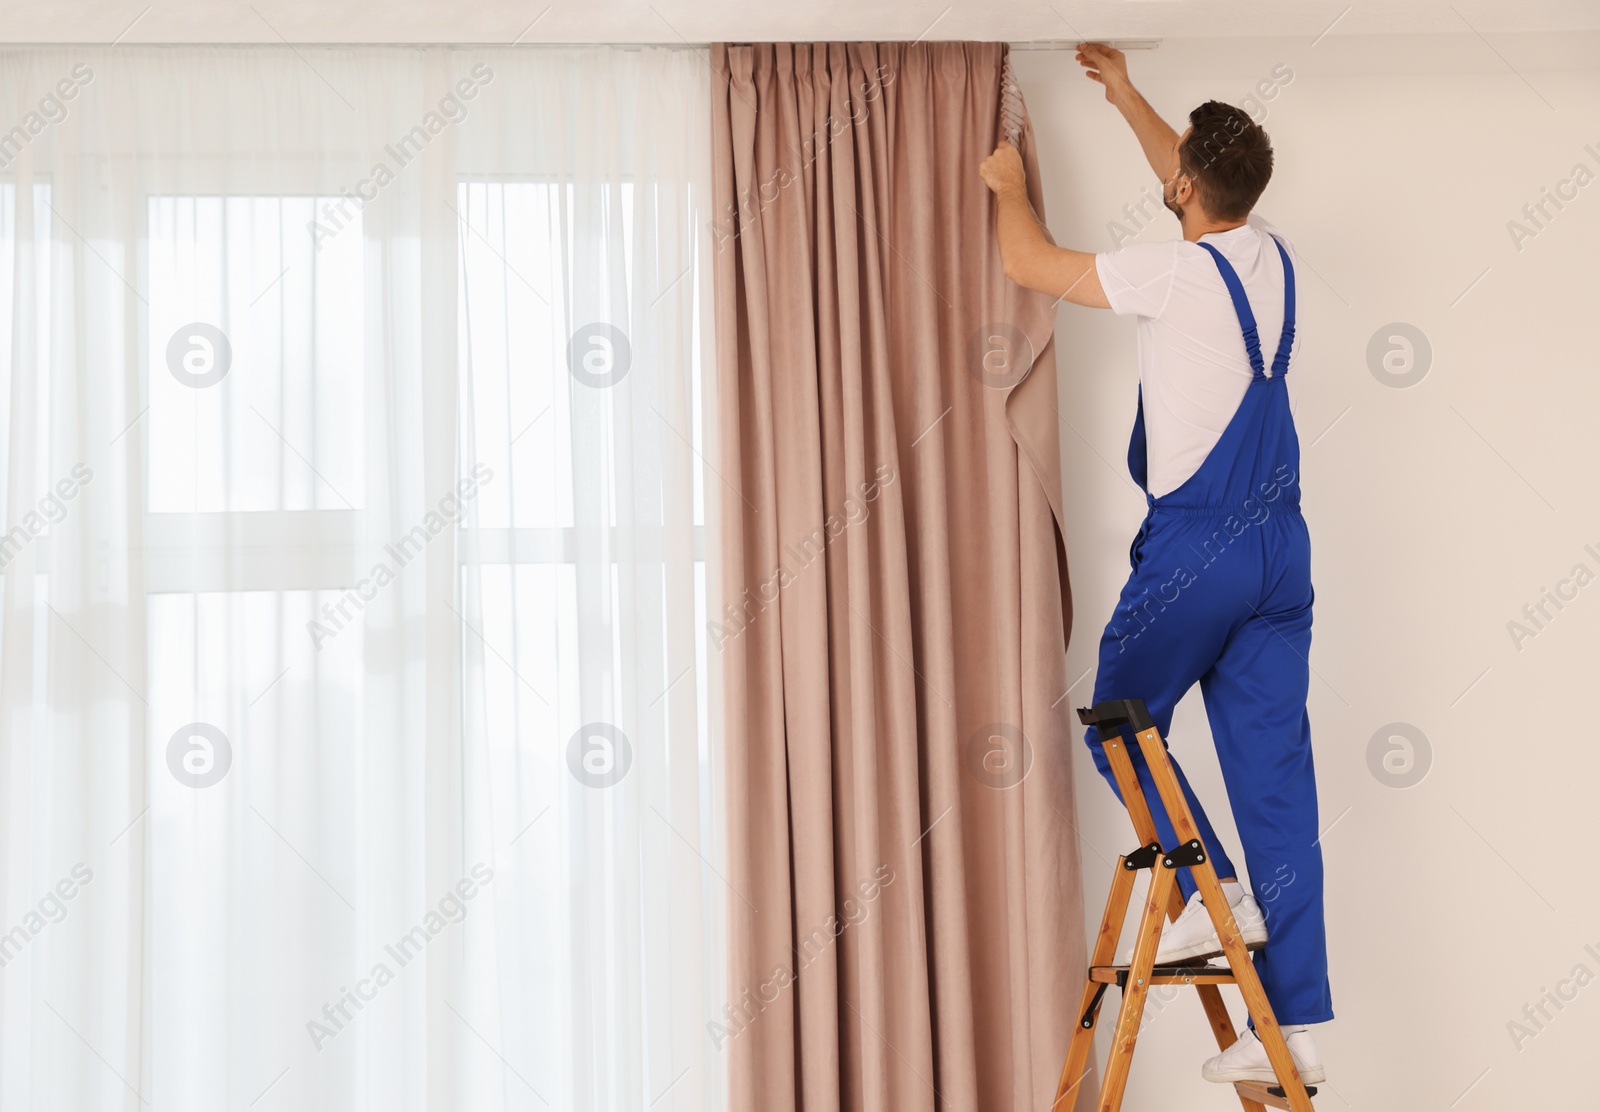 Photo of Worker in uniform hanging window curtain indoors, back view